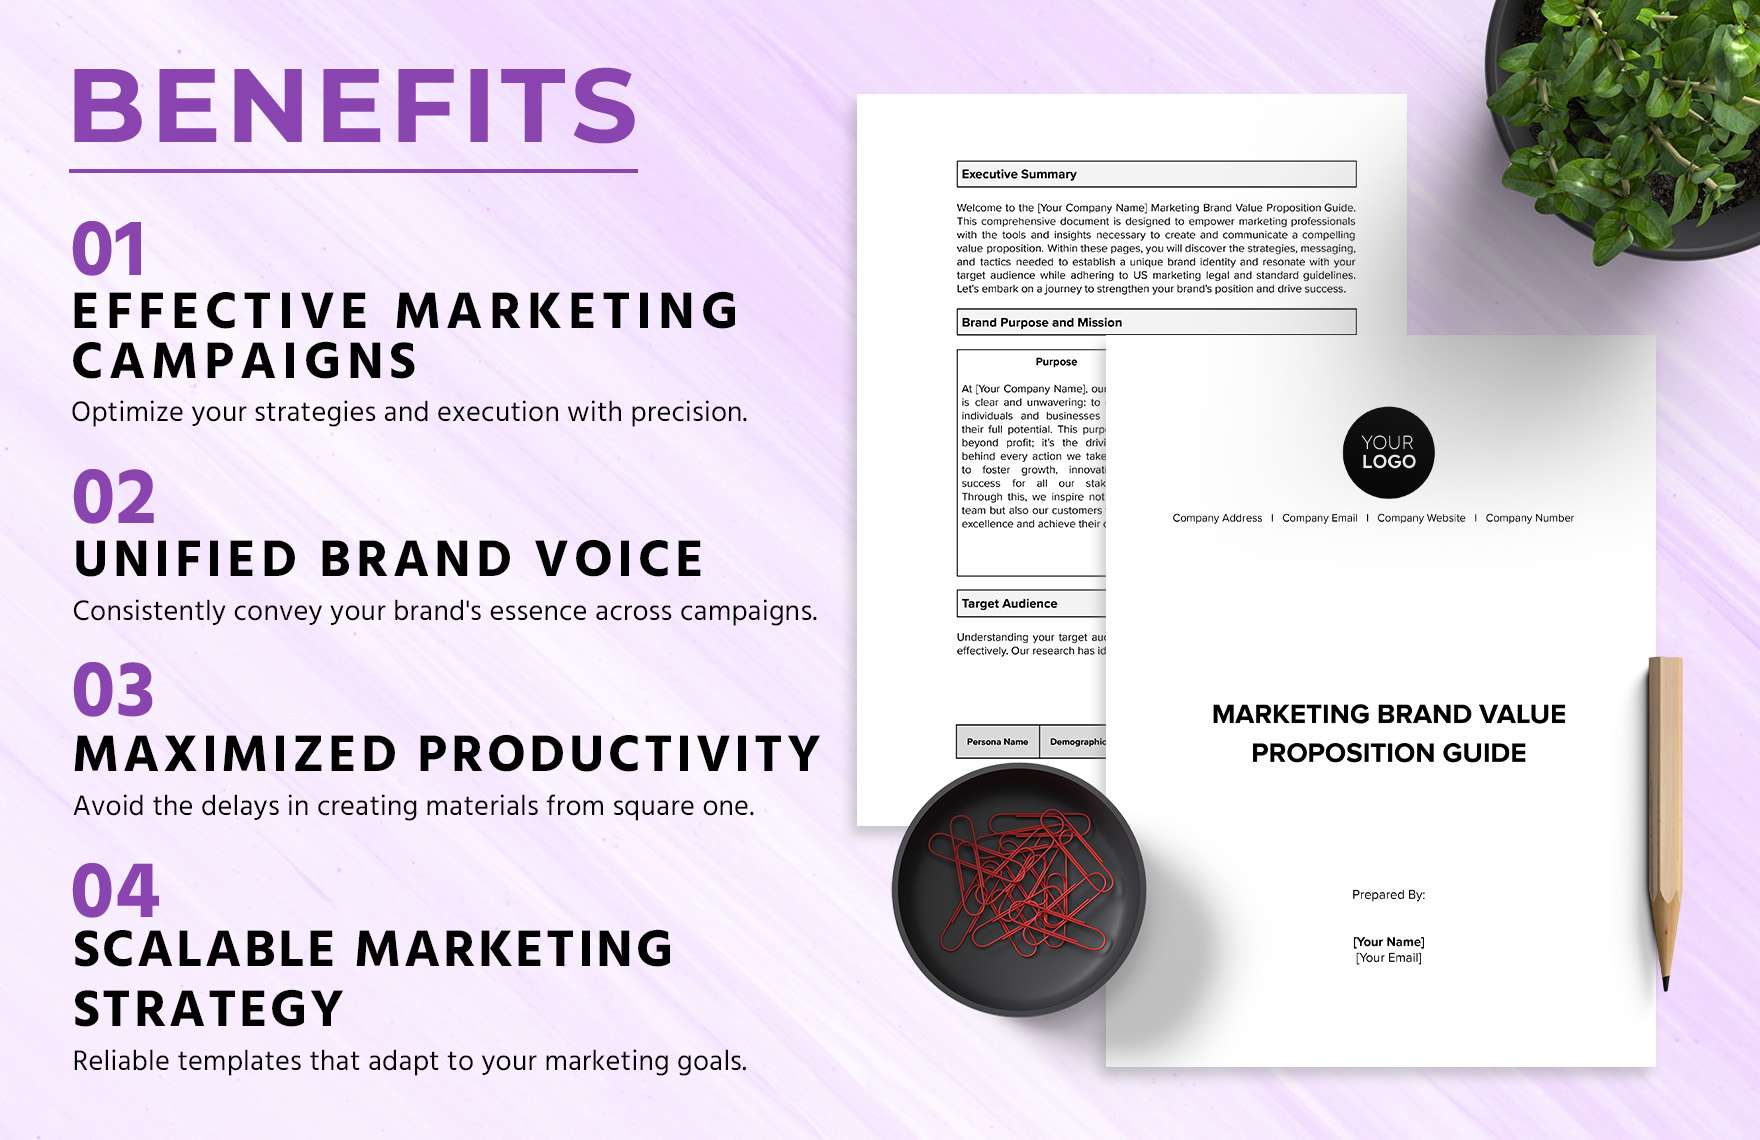 Marketing Brand Value Proposition Guide Template